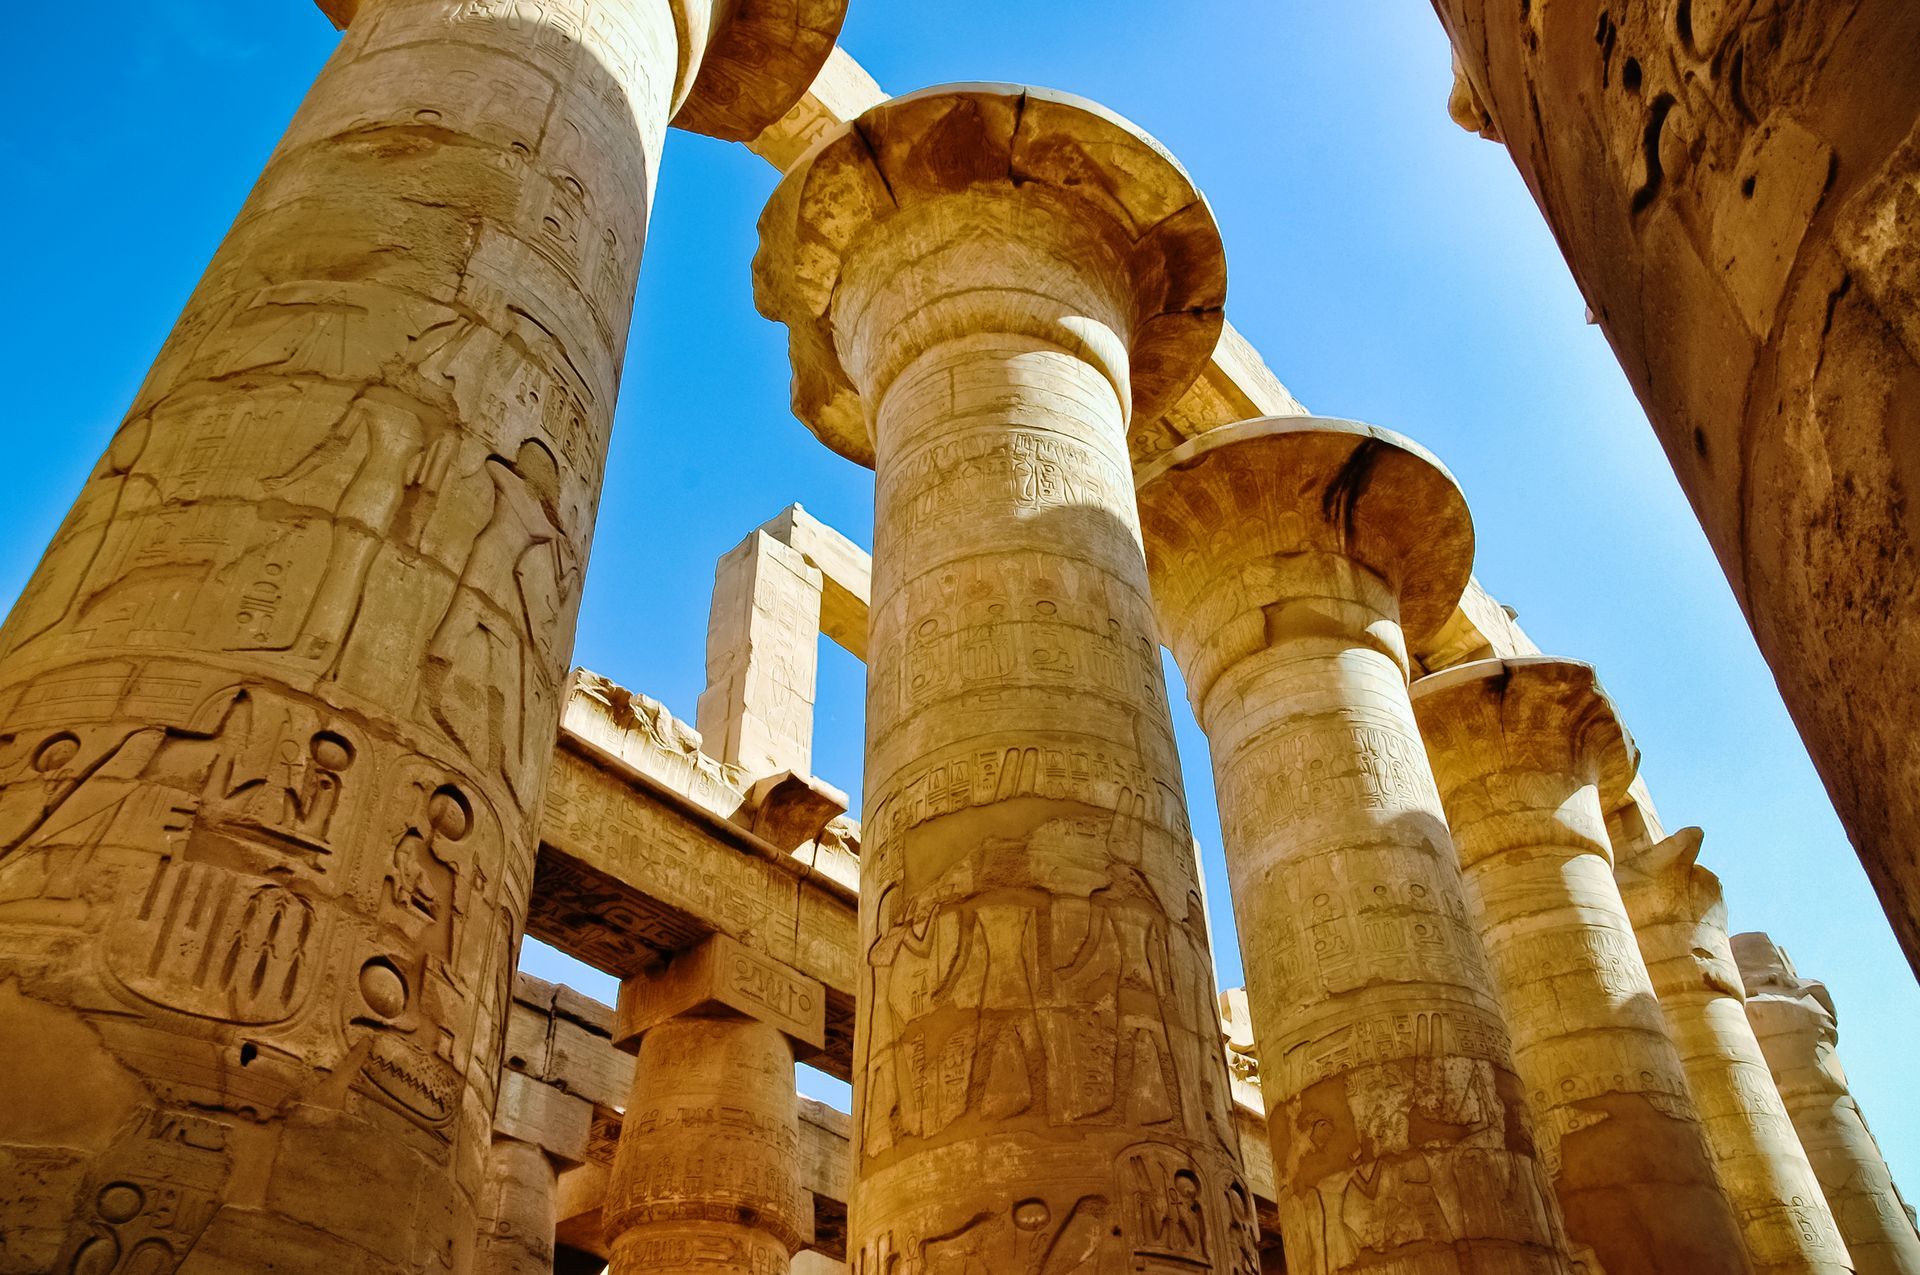 The Great Columns, The Great Hypostyle Hall Karnak, Egypt, North Africa - Egypt Holidays Barter's Travelnet